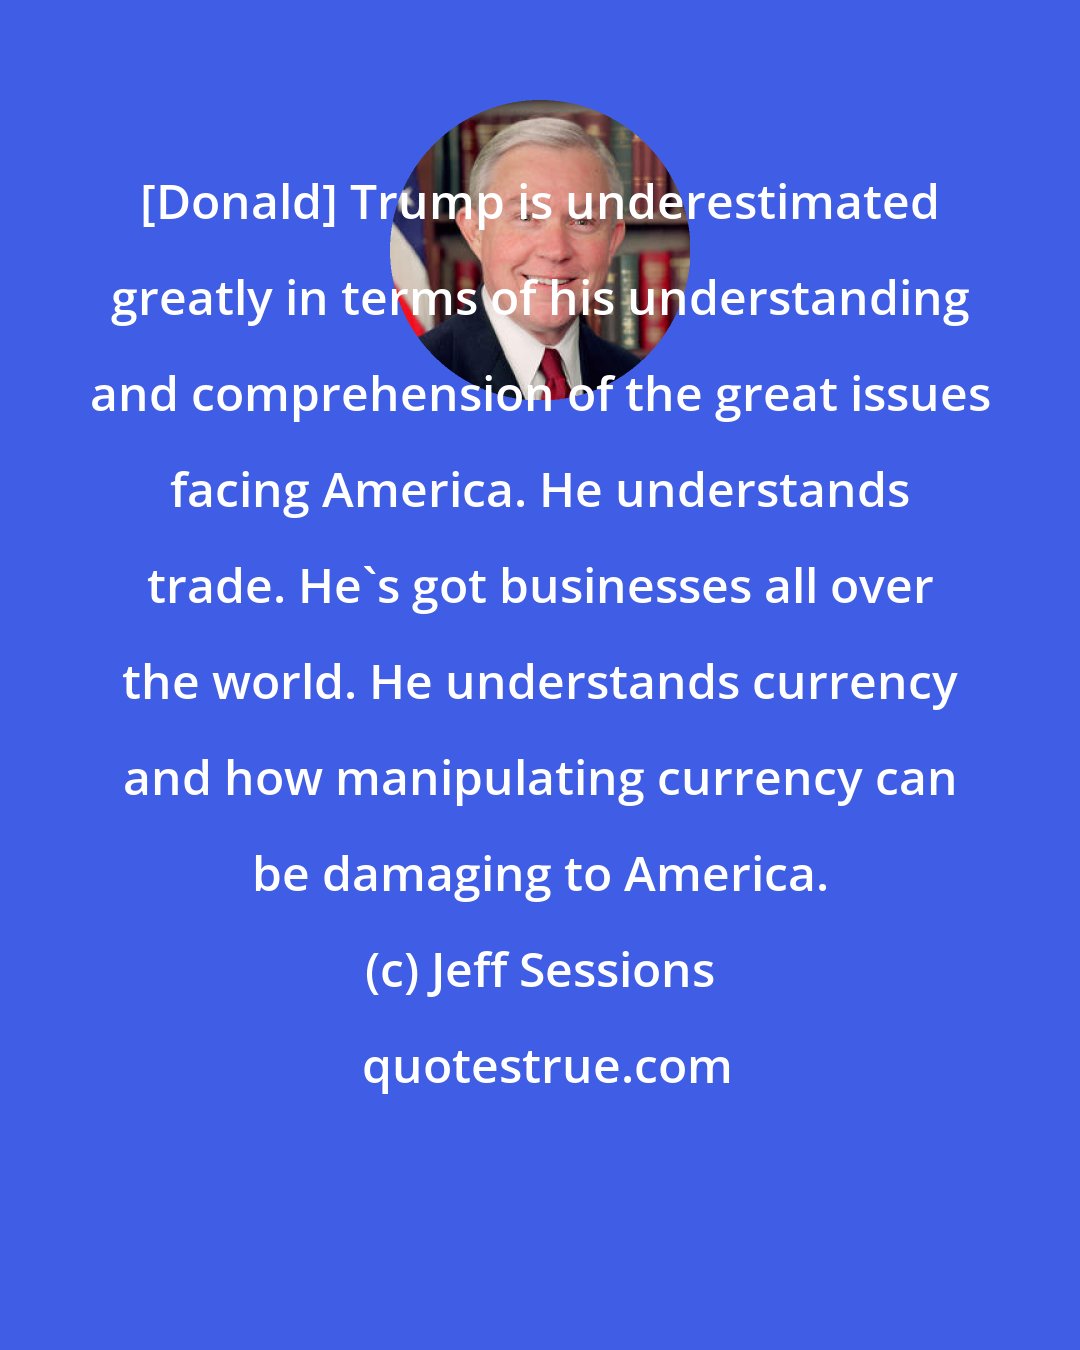 Jeff Sessions: [Donald] Trump is underestimated greatly in terms of his understanding and comprehension of the great issues facing America. He understands trade. He's got businesses all over the world. He understands currency and how manipulating currency can be damaging to America.